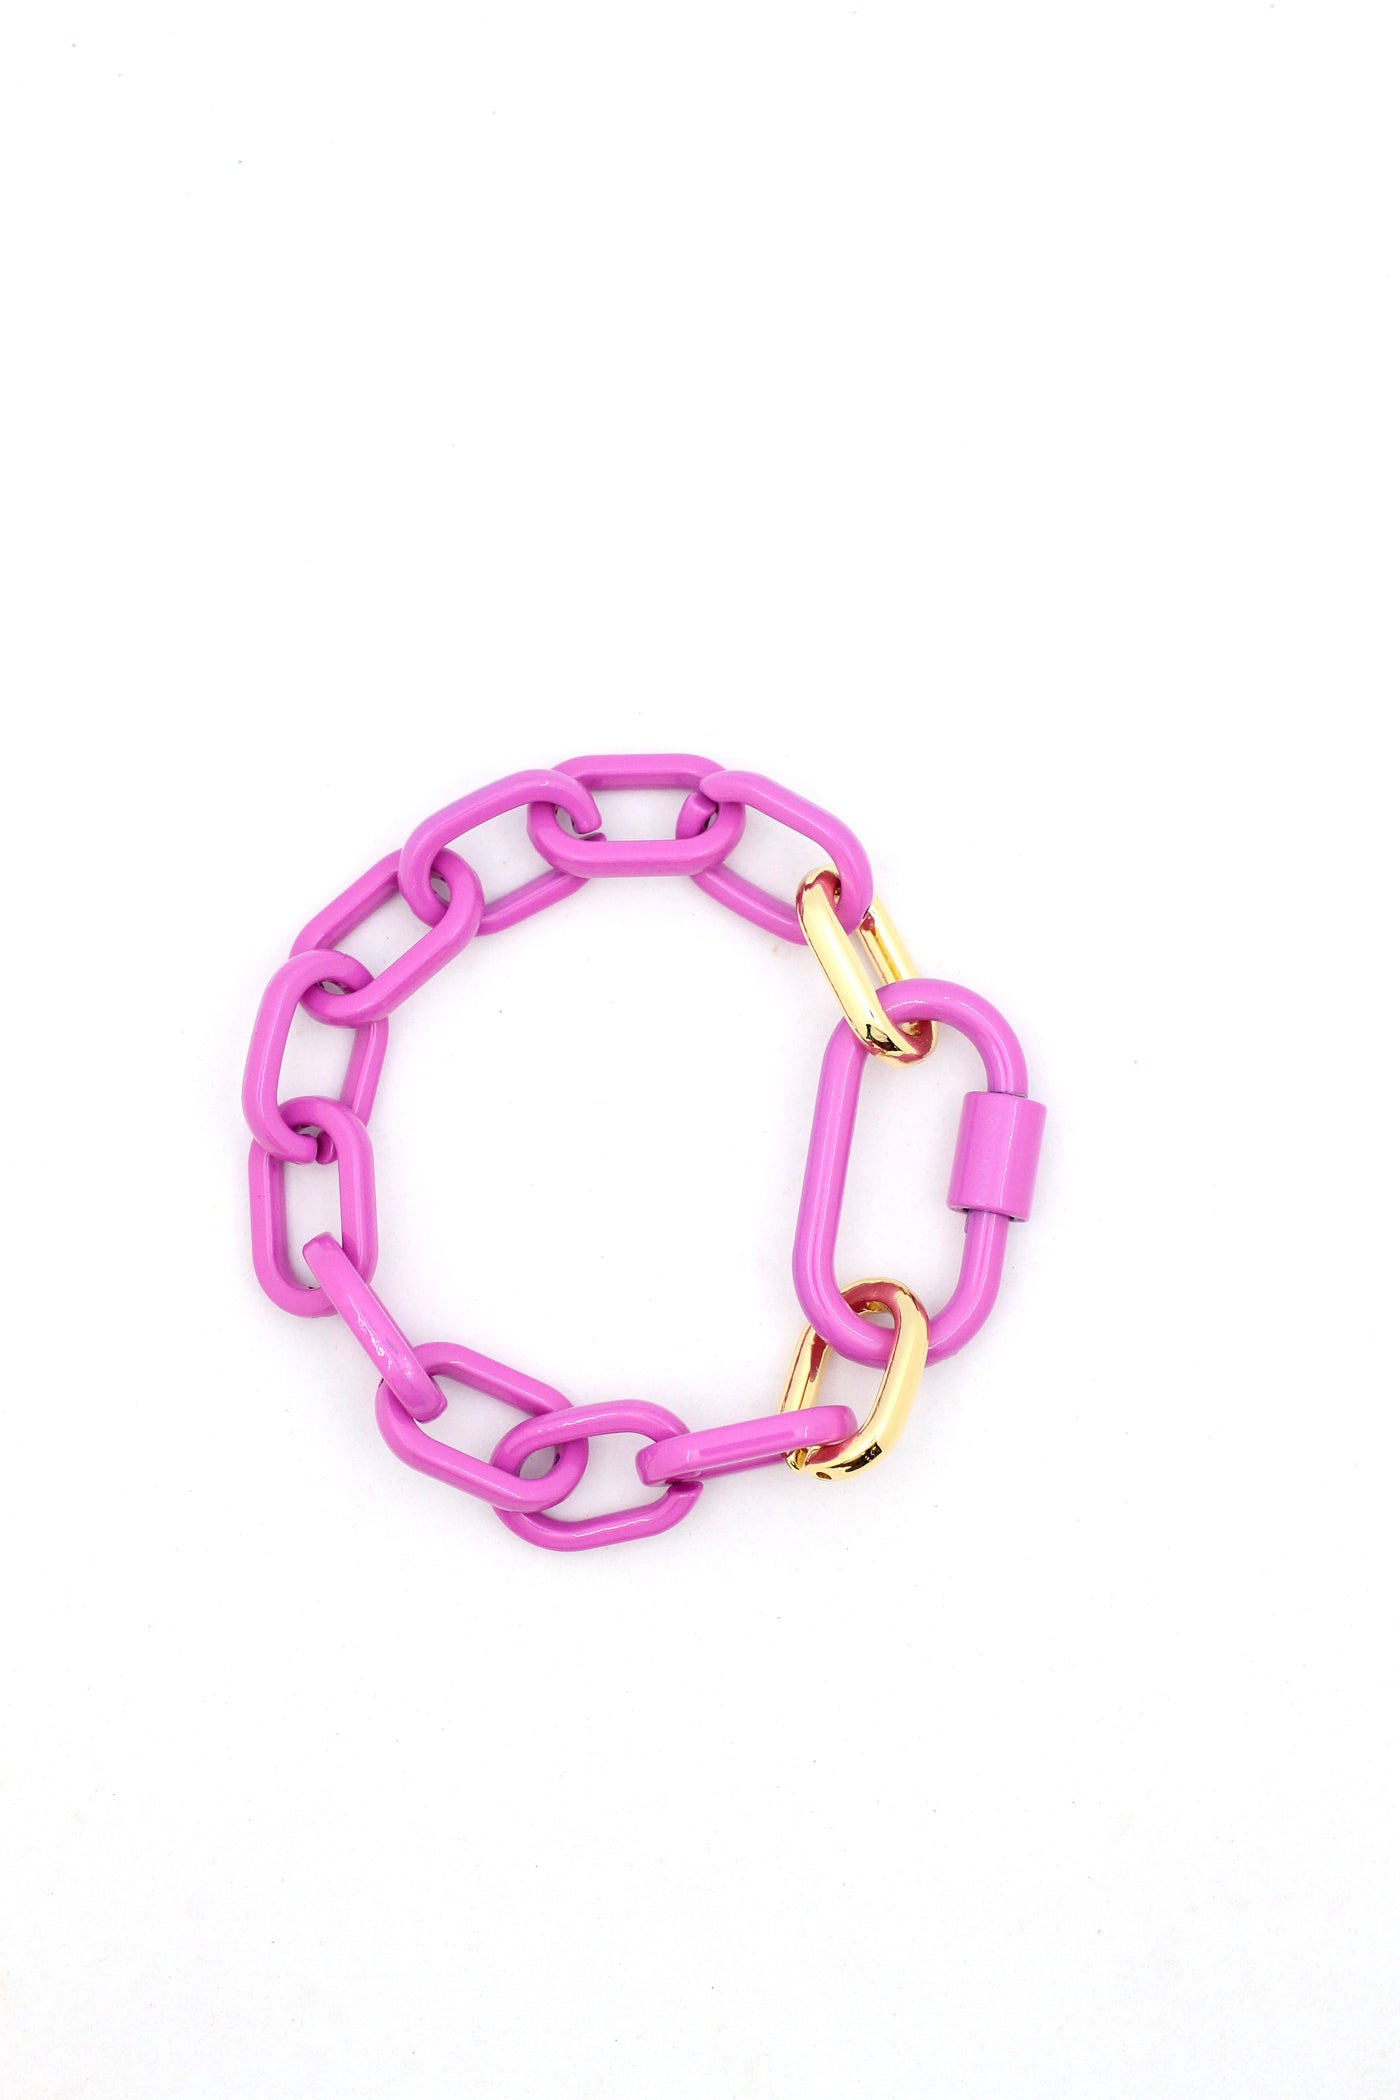 Luxe Link Enamel Chain Bracelet with Carabiner Lock Clasp, Assorted Co ...